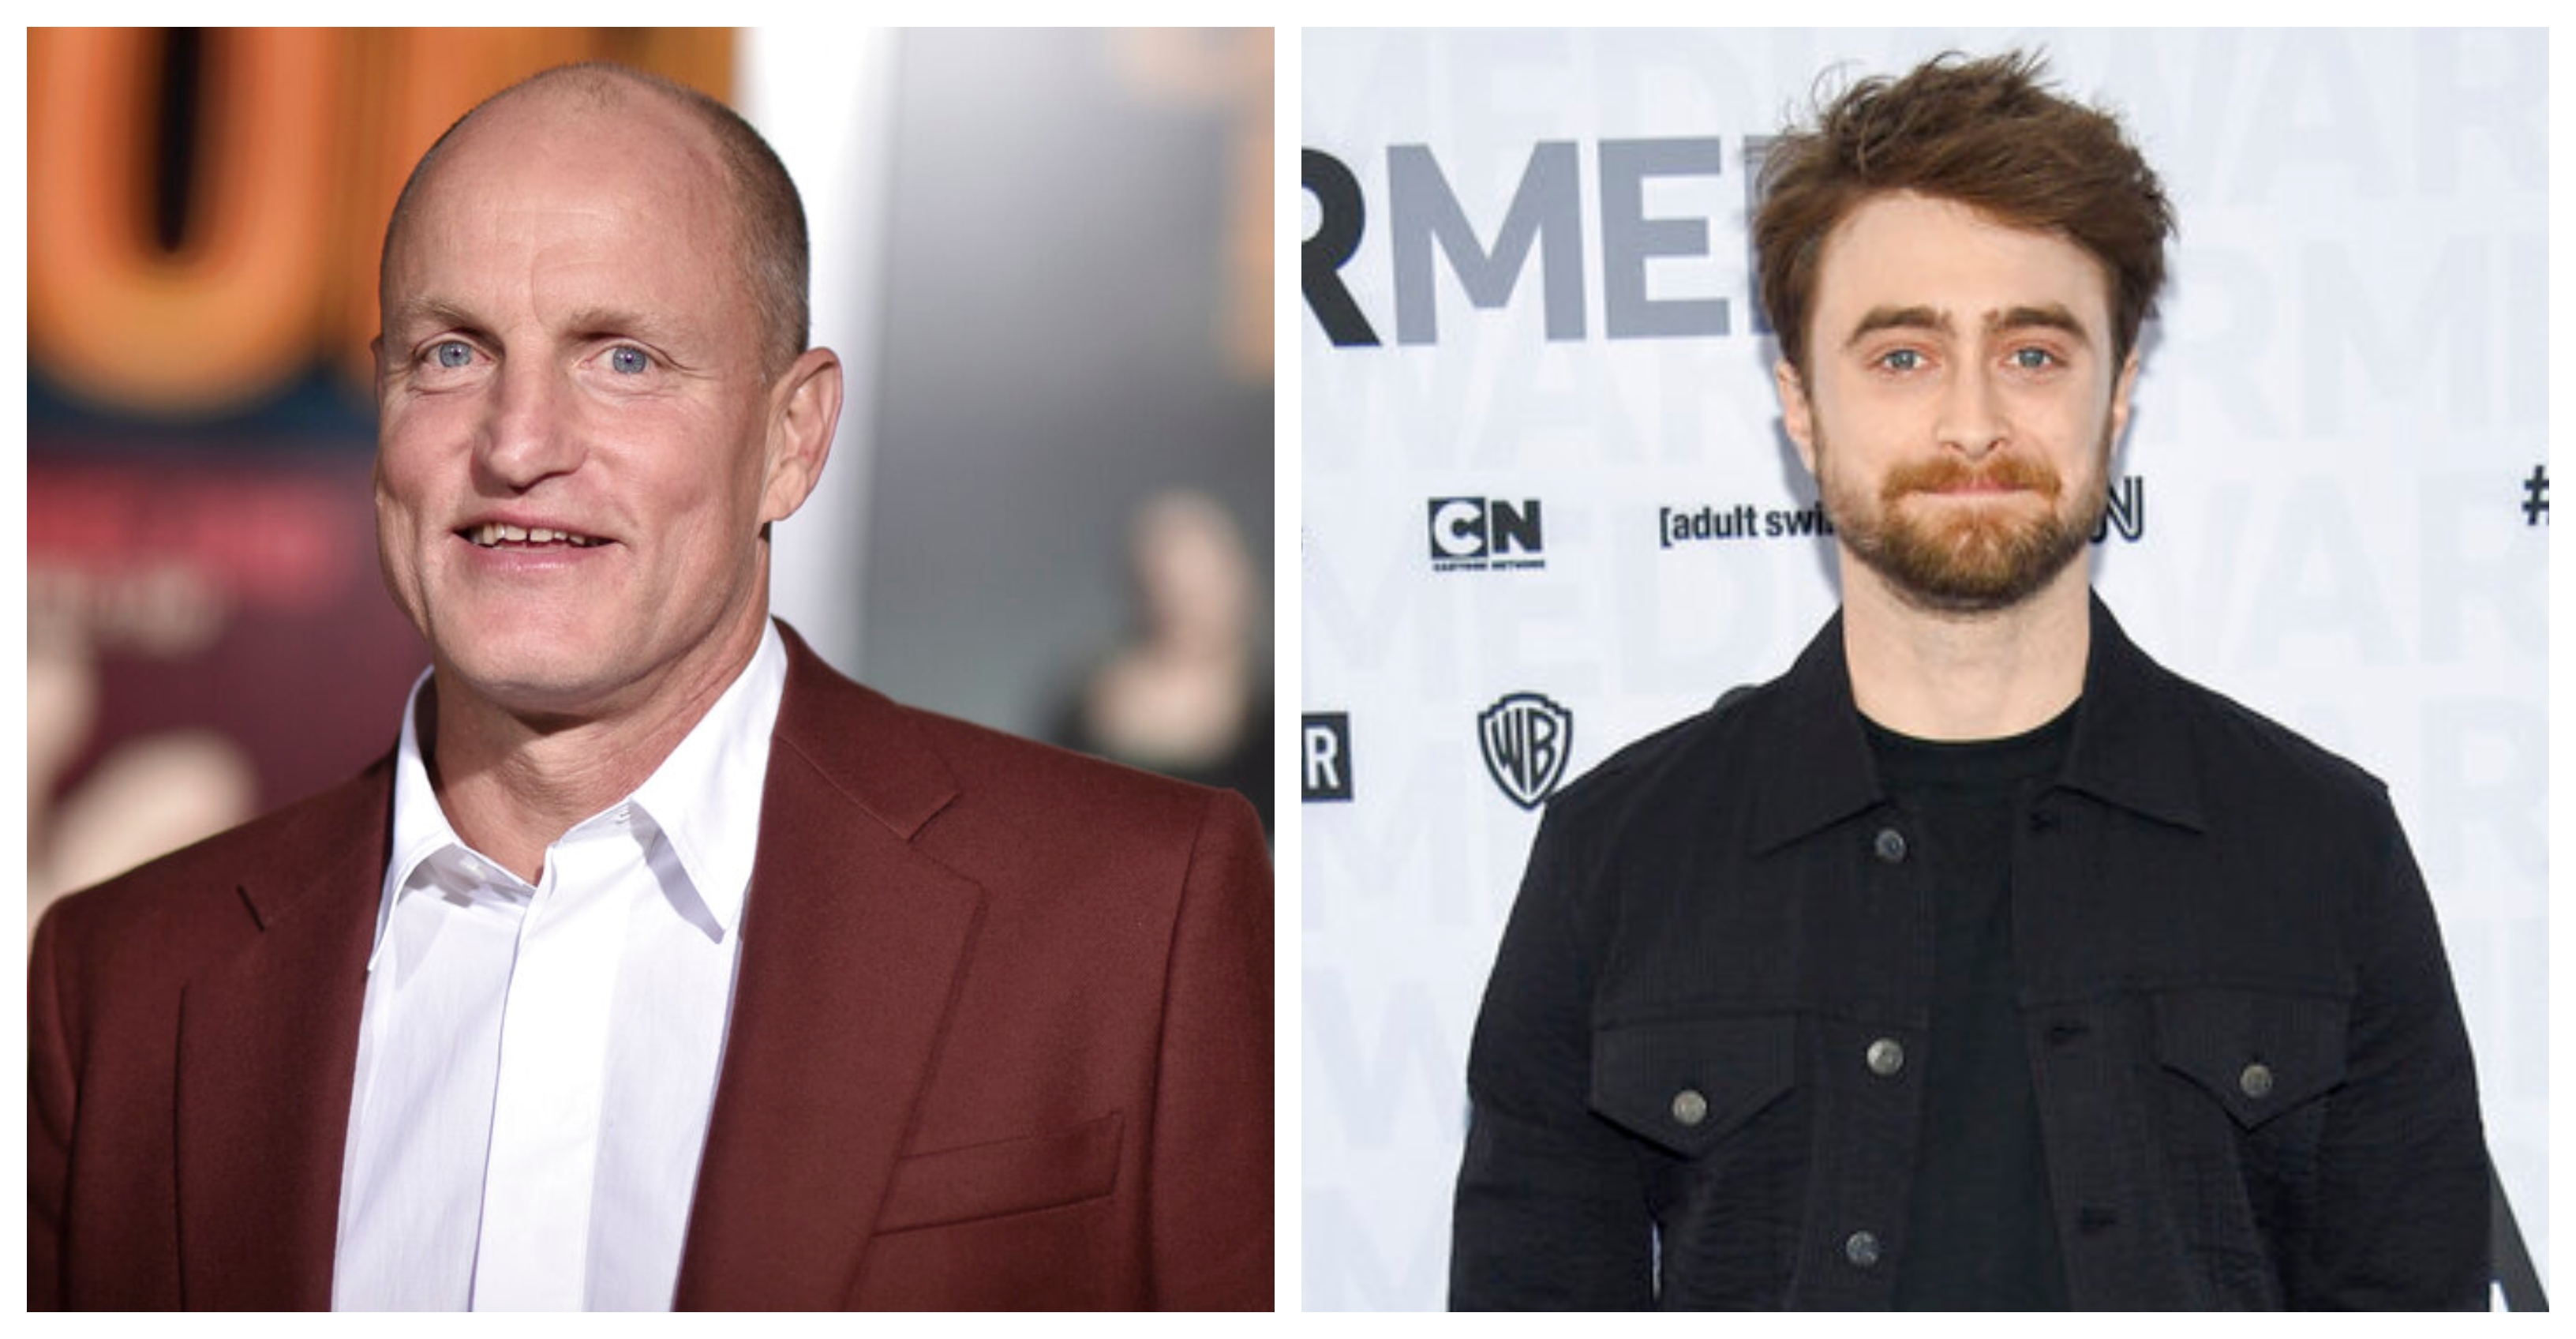 Today S Famous Birthdays List For July 23 21 Includes Celebrities Woody Harrelson Daniel Radcliffe Cleveland Com